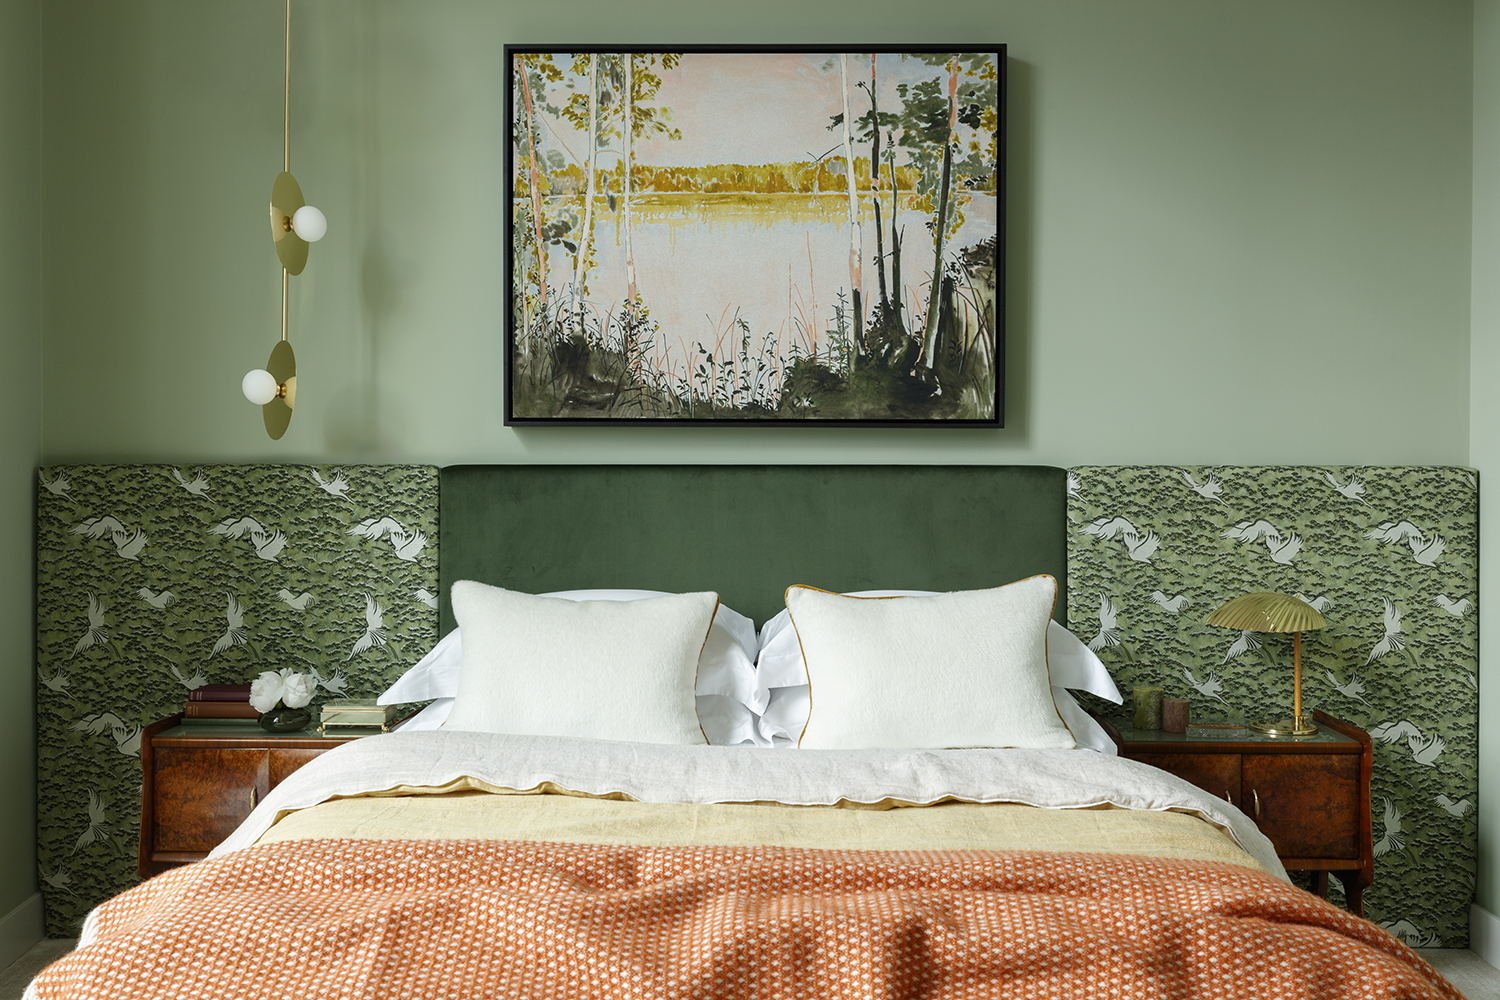 Explore 63 Green Bedroom Ideas to Energize Your Space